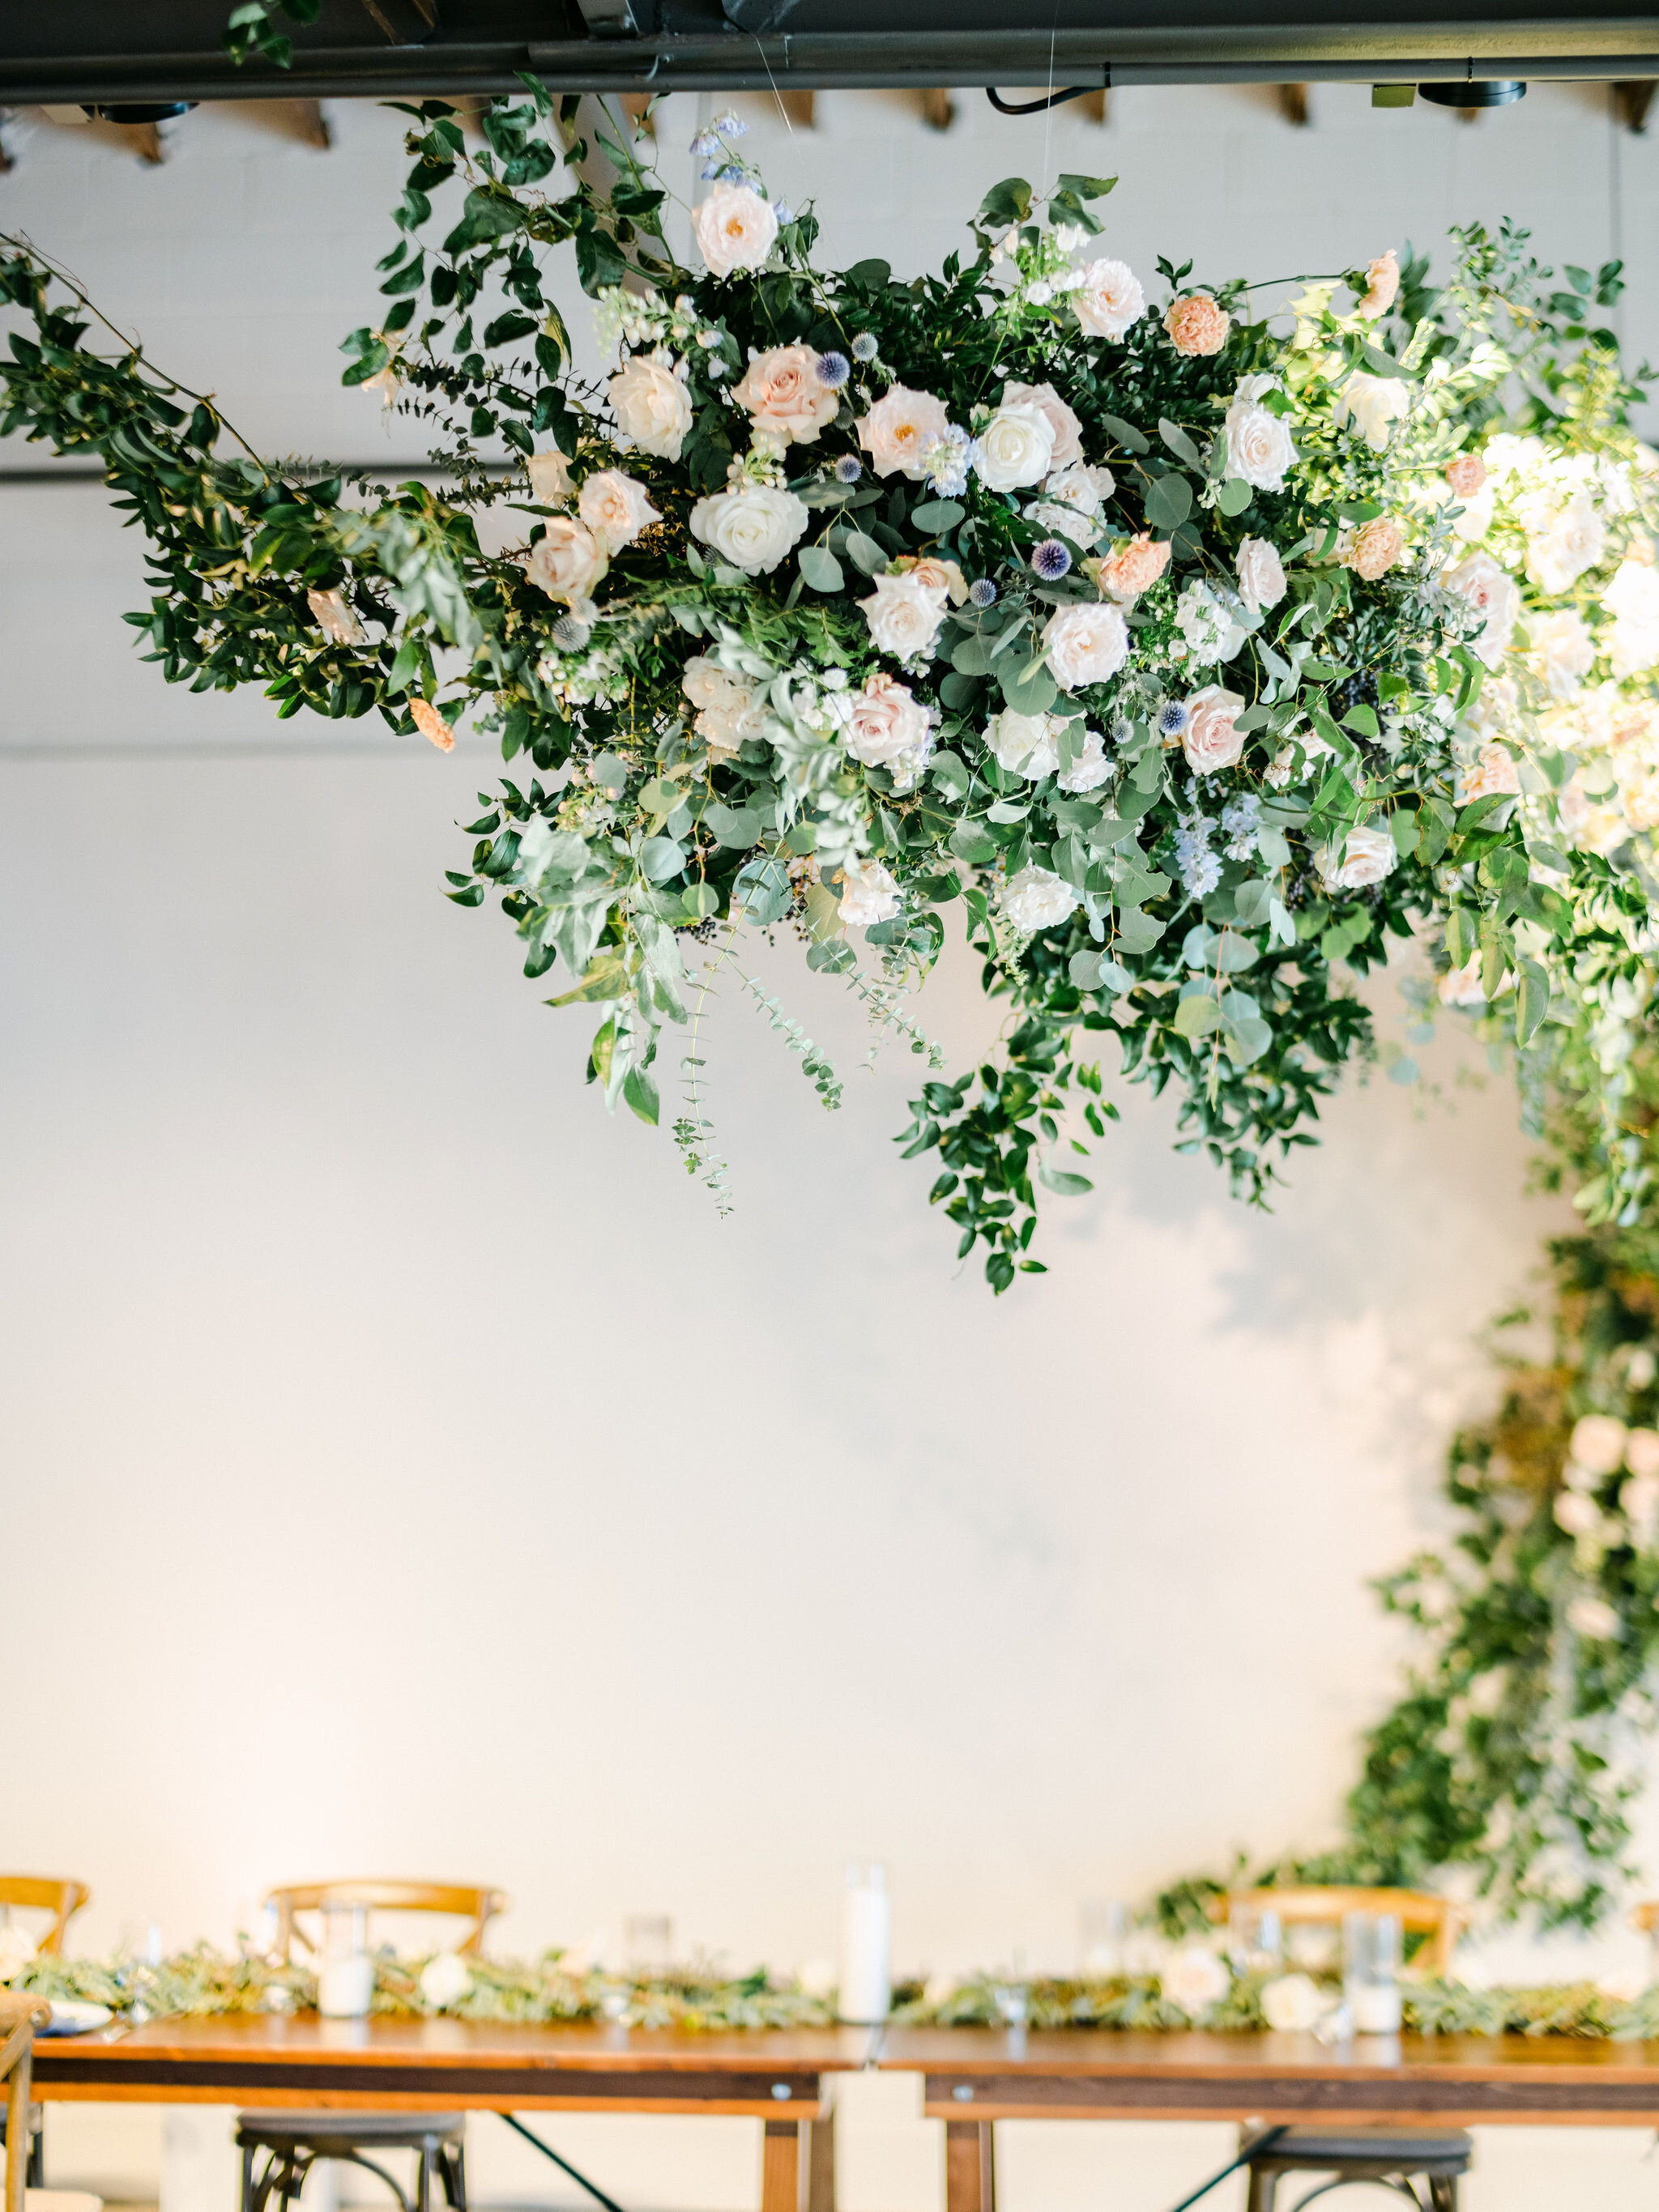 A dramatic and winding installation full of movement that grew up the back wall, across the head table and out into the dance floor. Filled with white and blush garden roses, spray roses, delphinium, blue thistle, heirloom carnations, eucalyptus and…